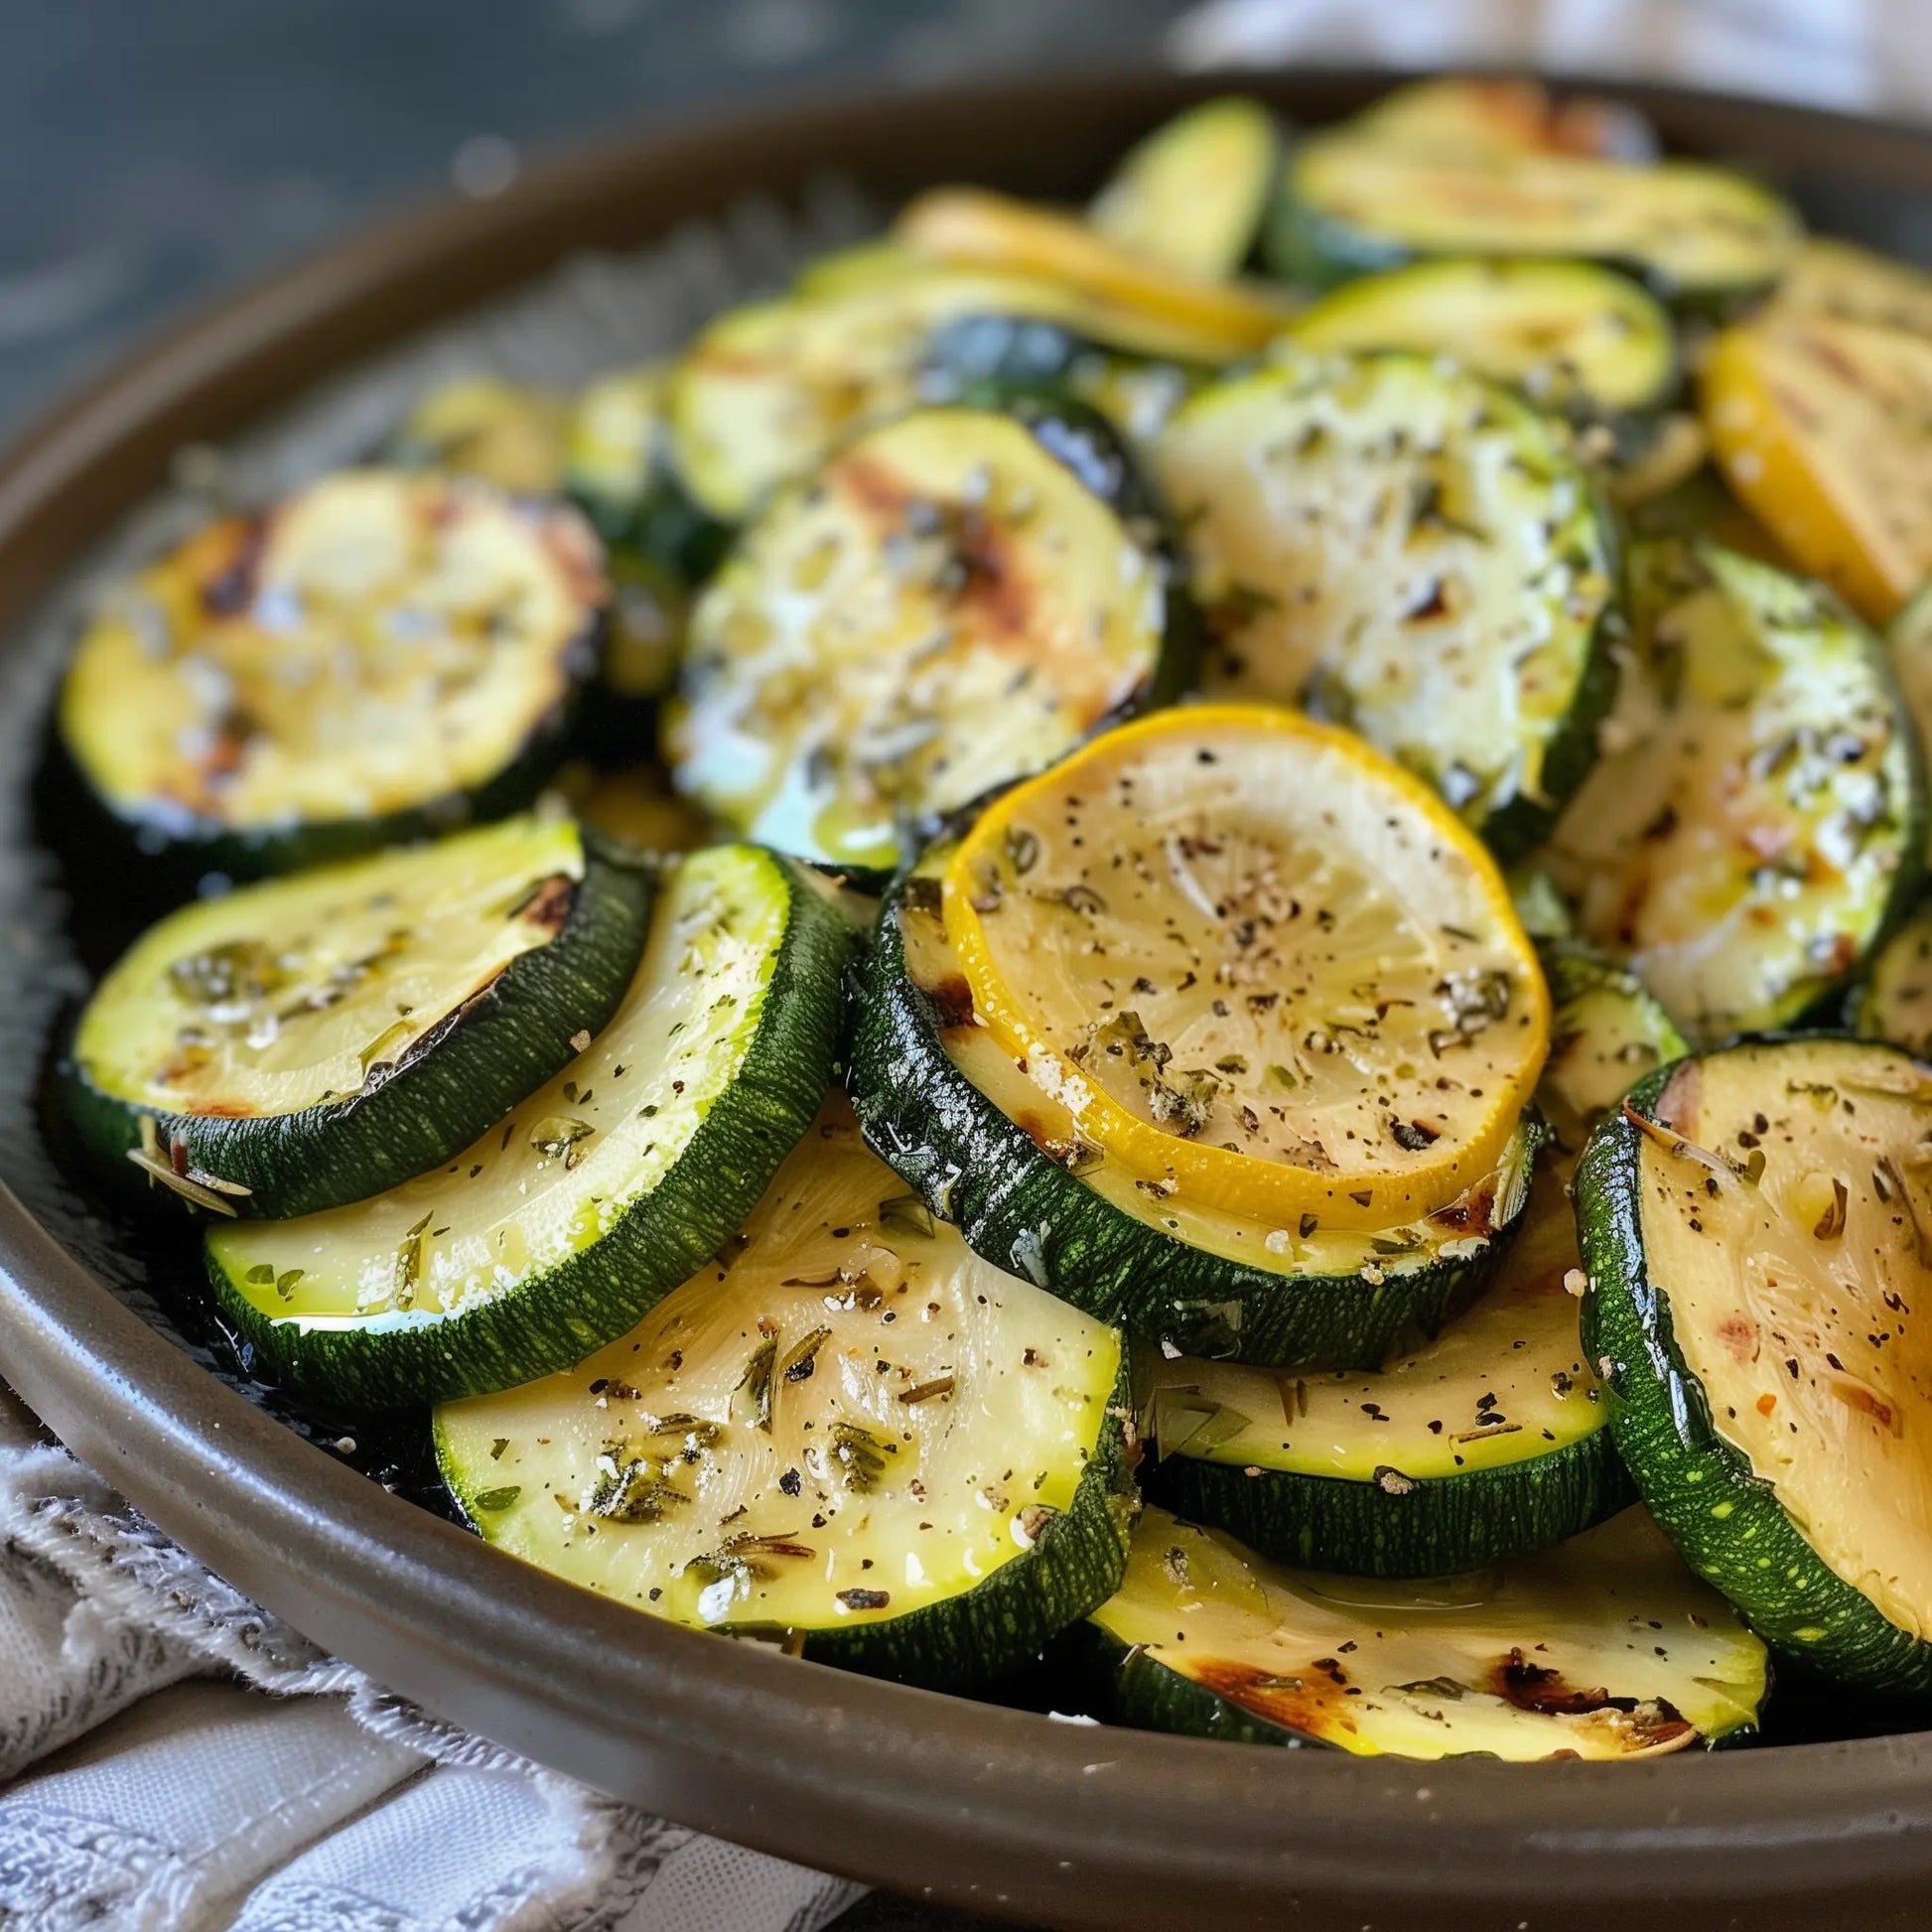 Lemon Pepper Zucchini - Try A Prompt Try A Prompt